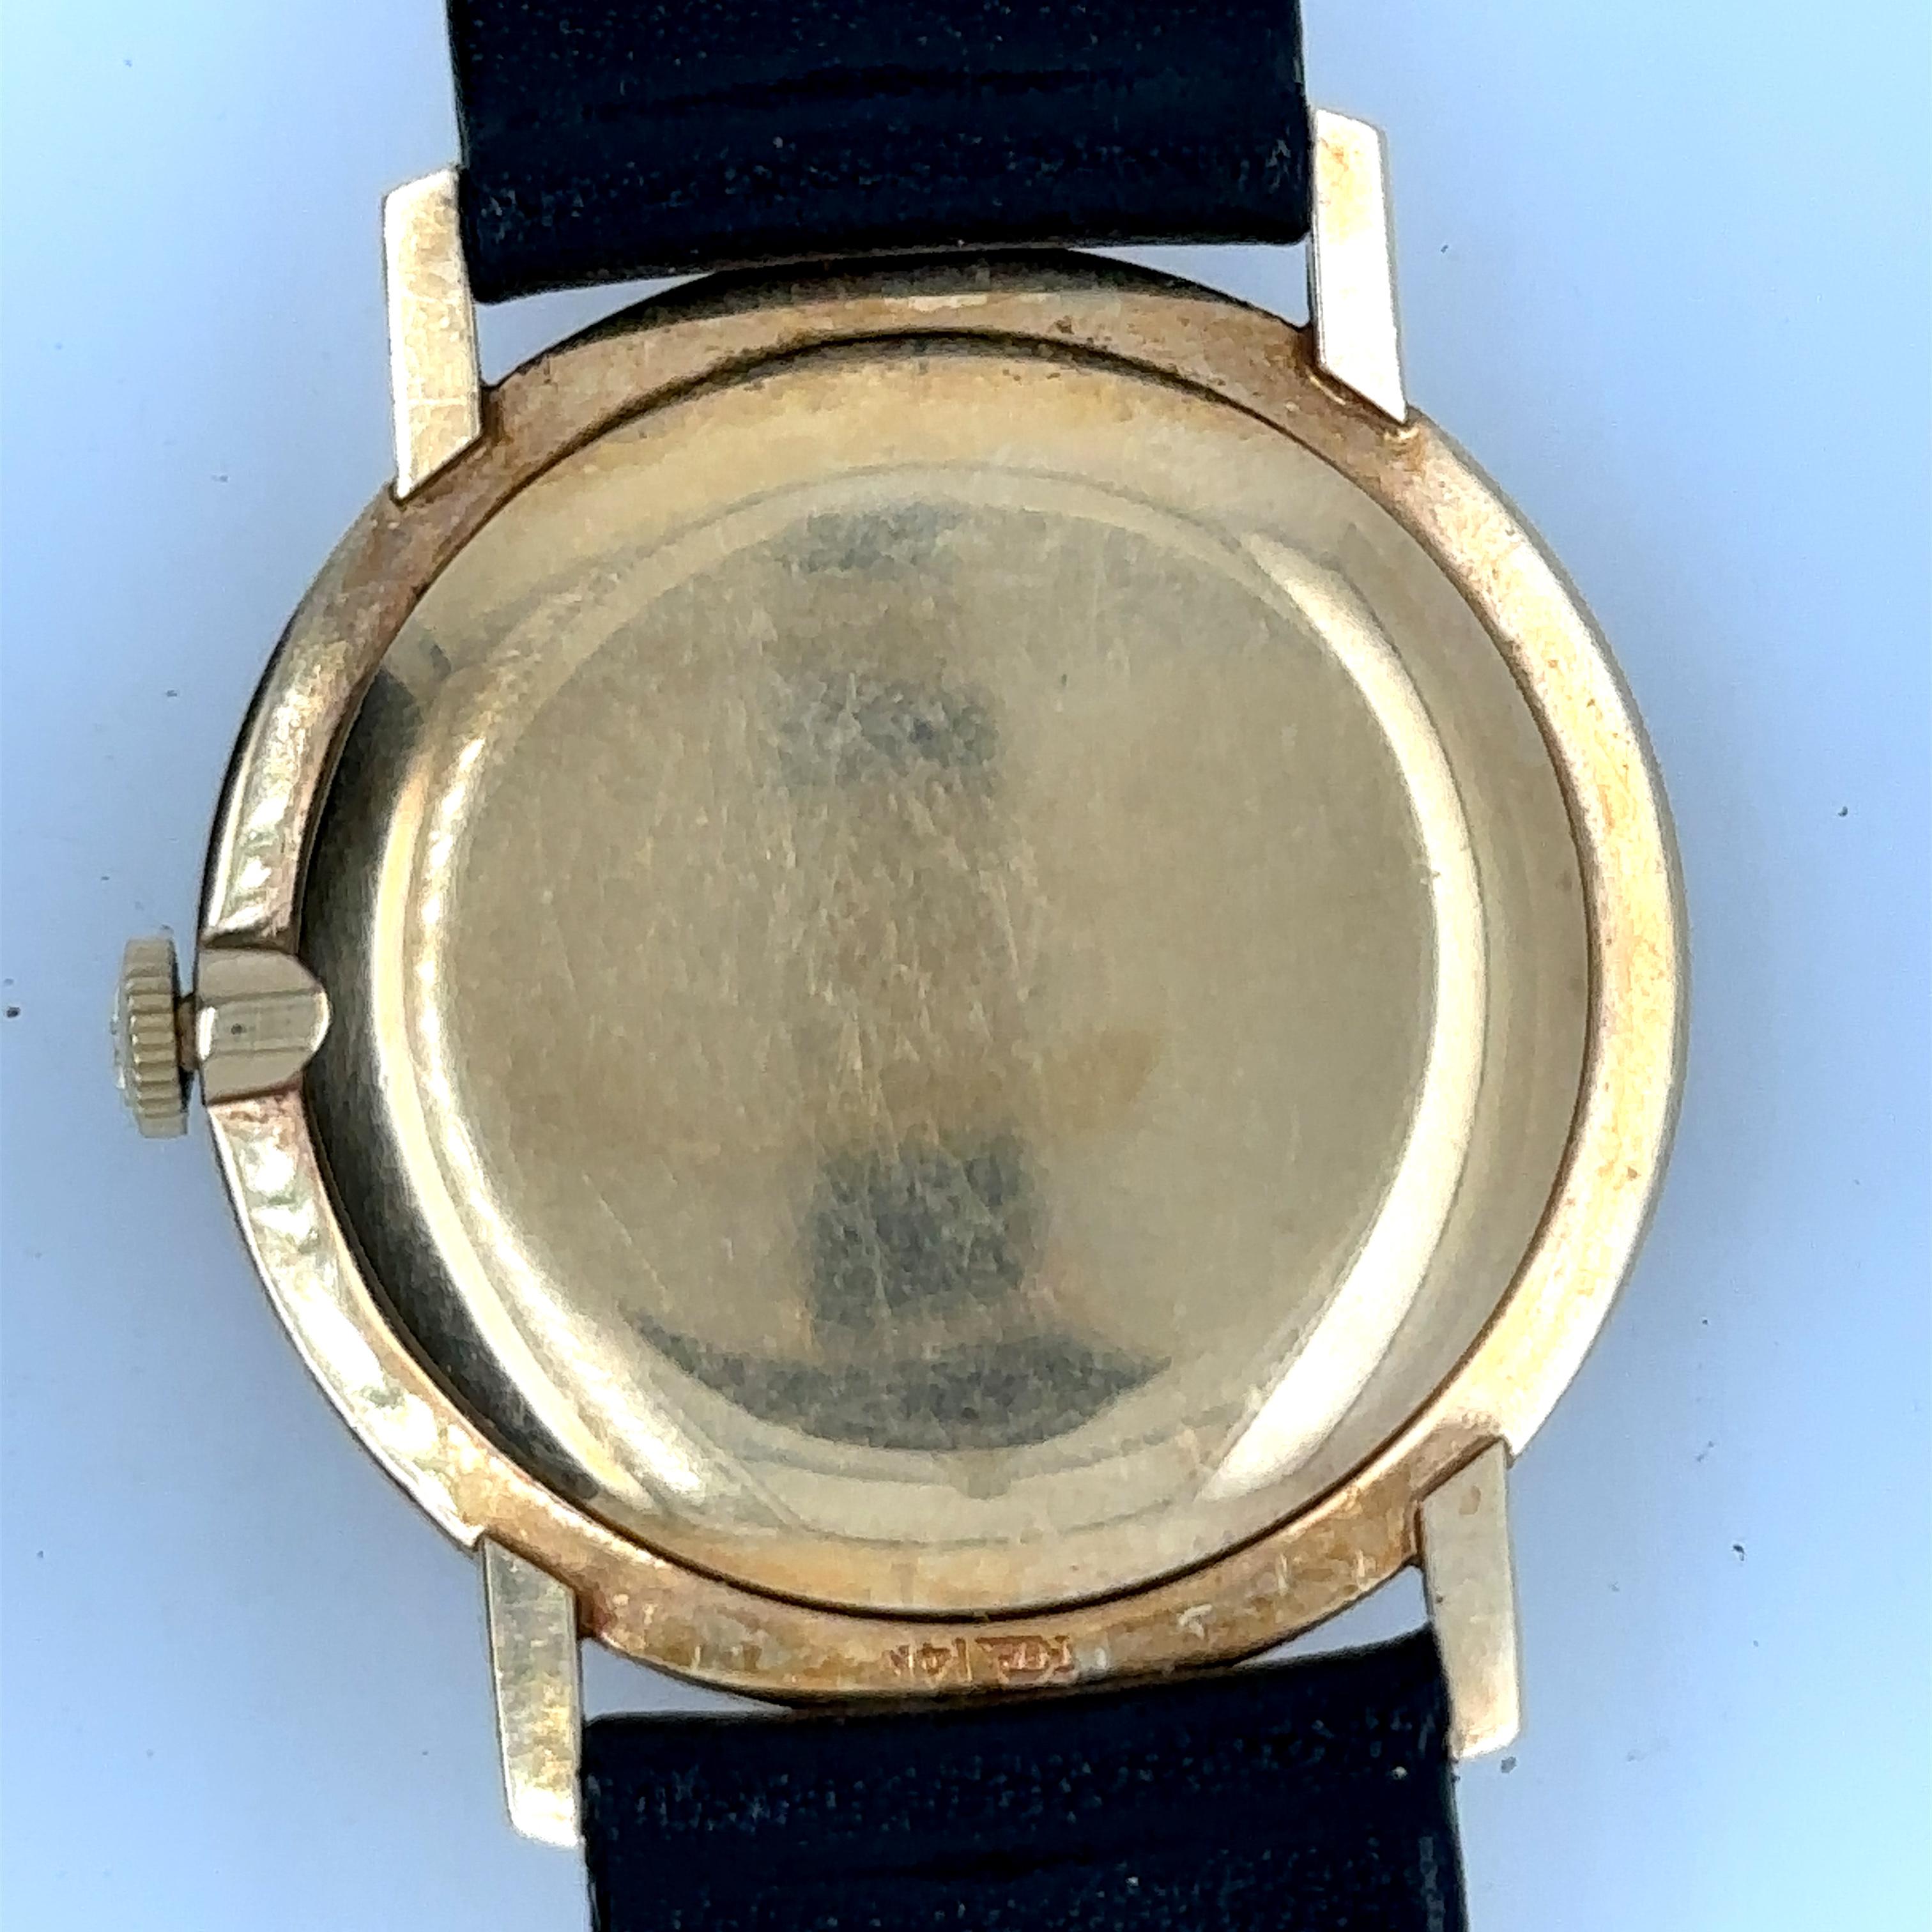 Vintage Jaeger Lecoultre 17J Dia Dial Solid 14K Gold Watch.
14k yellow gold case, bezel and caseback.
Champagne coloured dial with a black oval that has 10 diamond numeral markers.
Has roman numerals at 12 and 6 o'clock position.
Strap has been